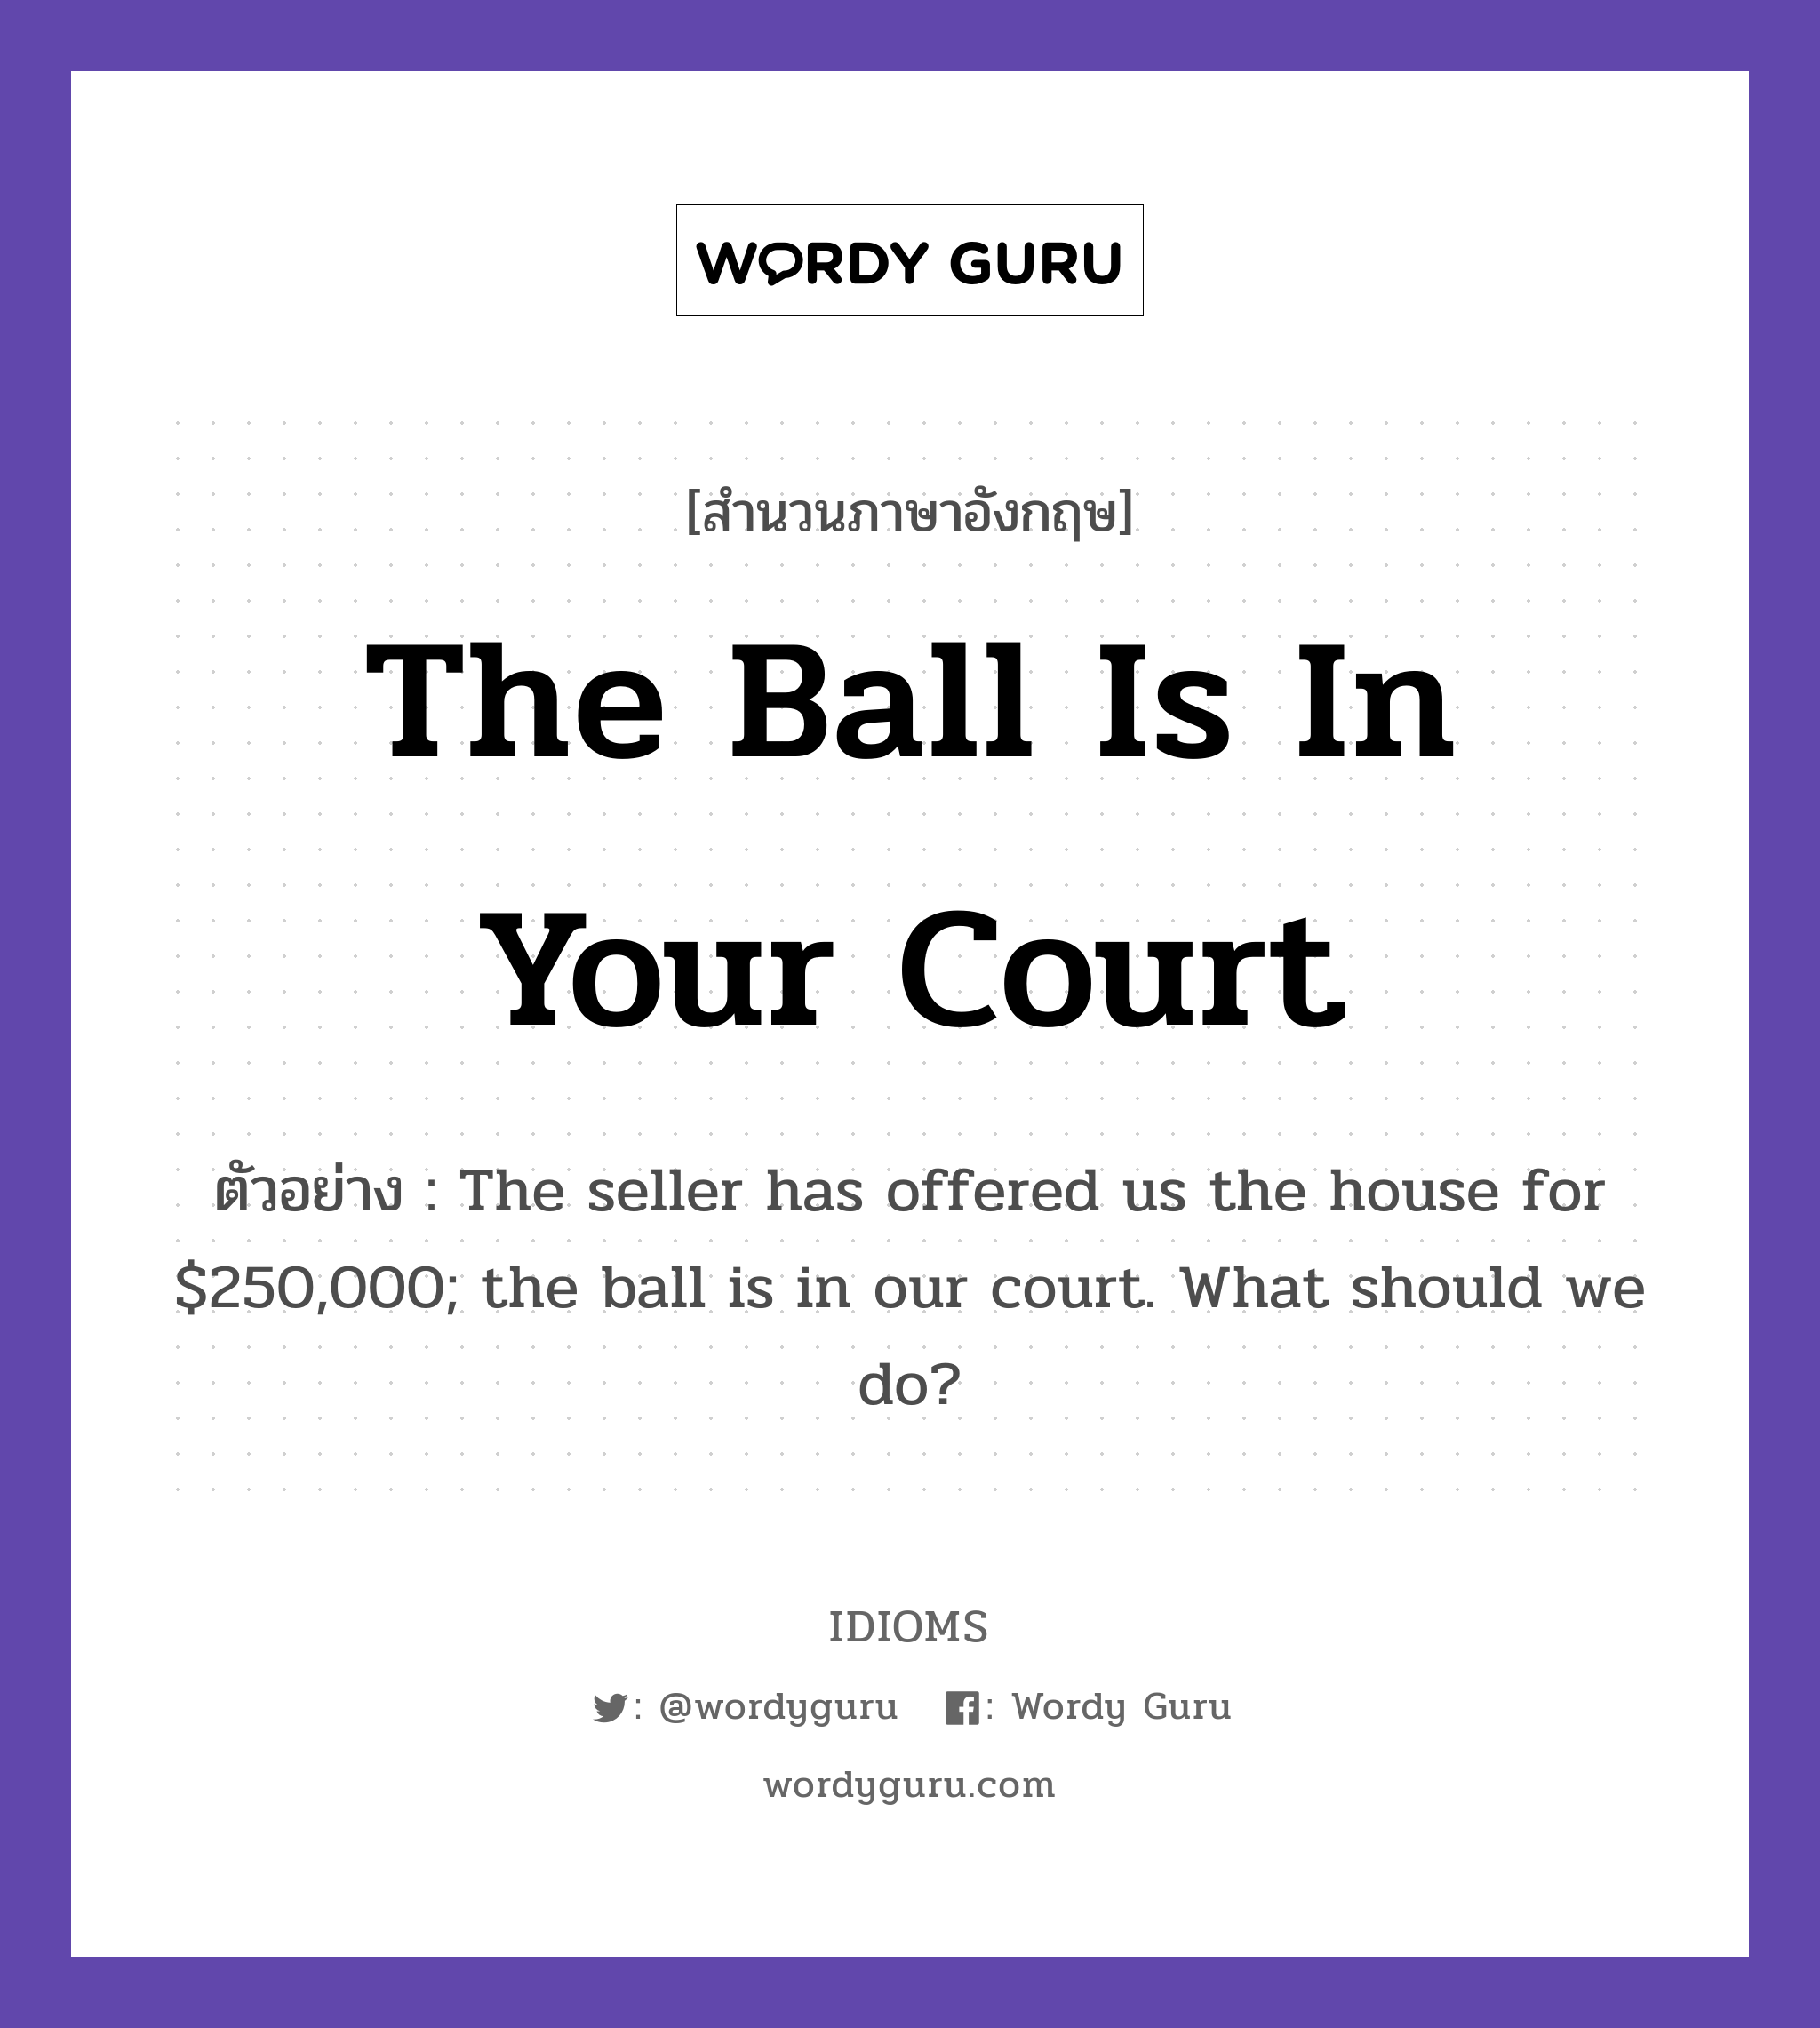 The Ball Is In Your Court แปลว่า?, สำนวนภาษาอังกฤษ The Ball Is In Your Court ตัวอย่าง The seller has offered us the house for $250,000; the ball is in our court. What should we do?